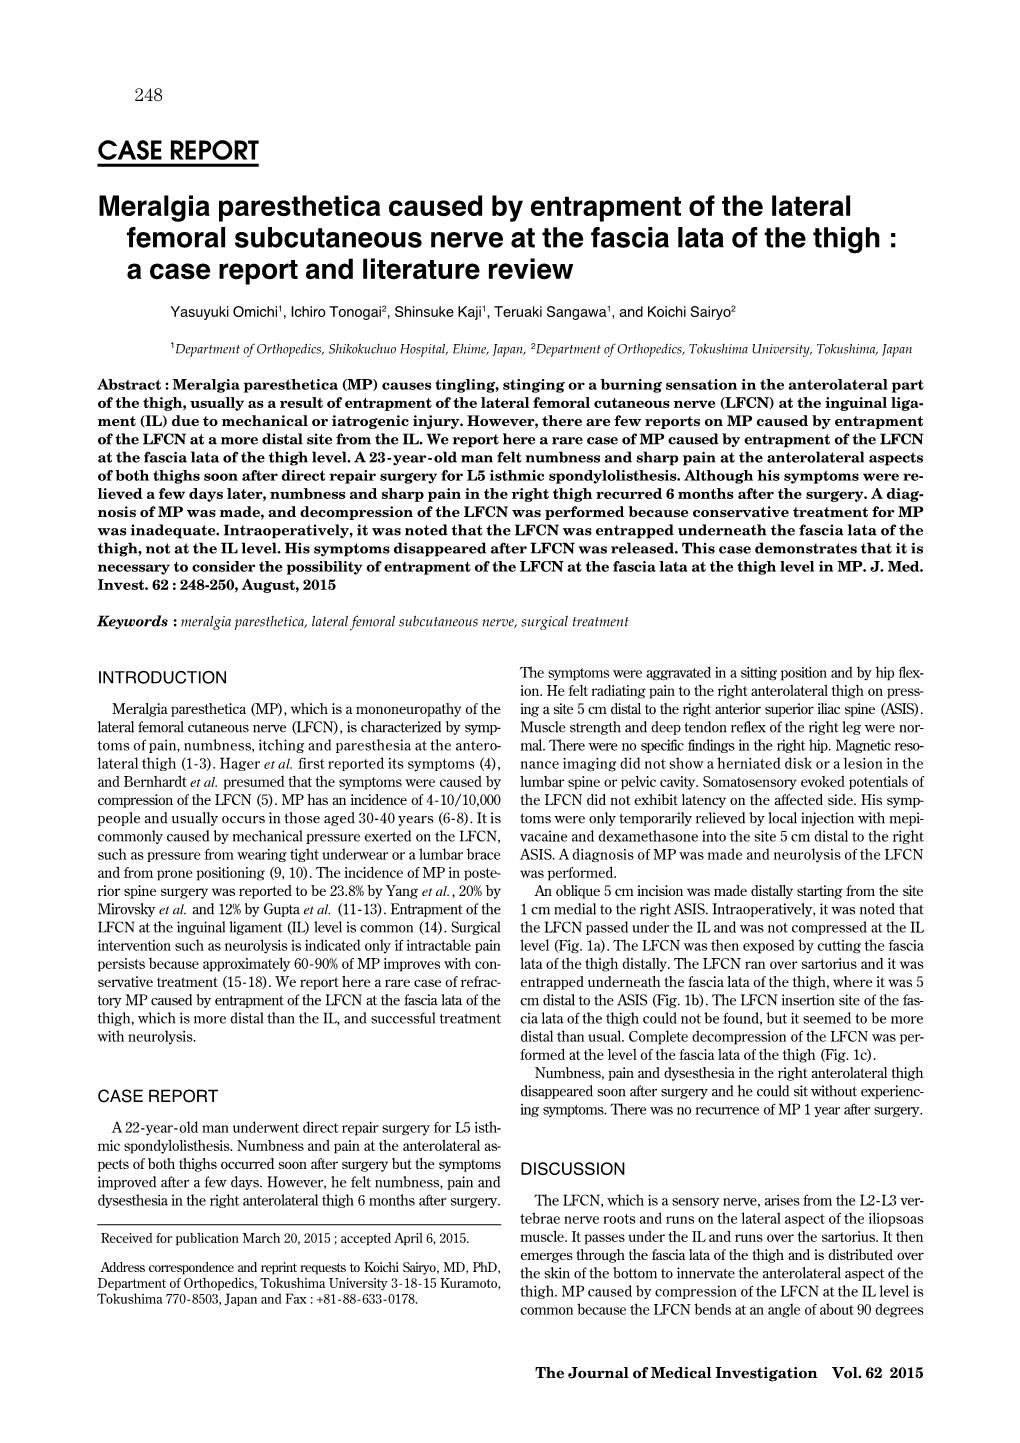 Meralgia Paresthetica Caused by Entrapment of the Lateral Femoral Subcutaneous Nerve at the Fascia Lata of the Thigh : a Case Report and Literature Review